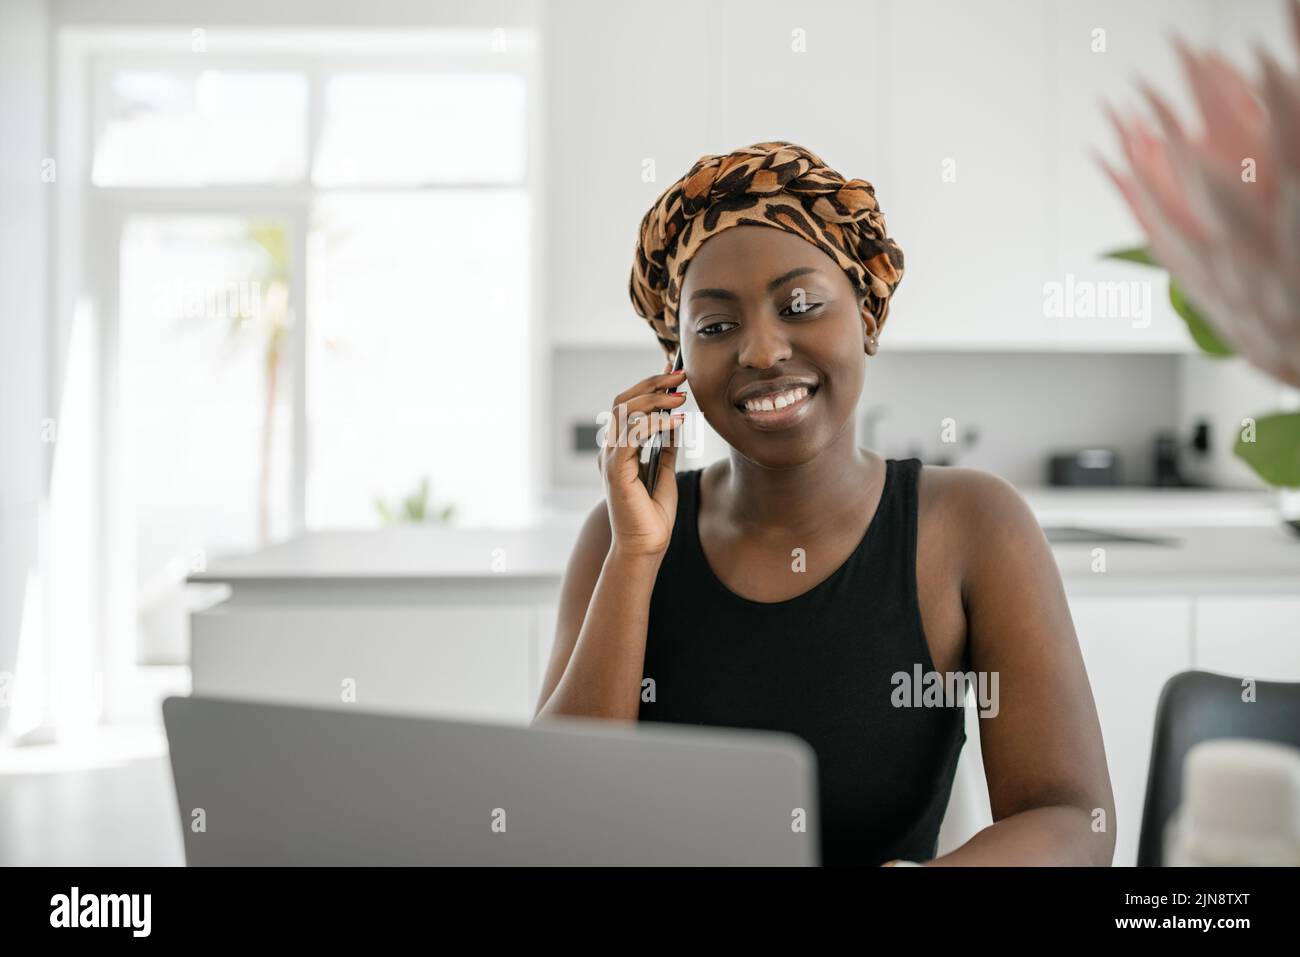 Beautiful young African woman wearing tradition headscarf. Sitting at home working on laptop. On phone call smiling Stock Photo